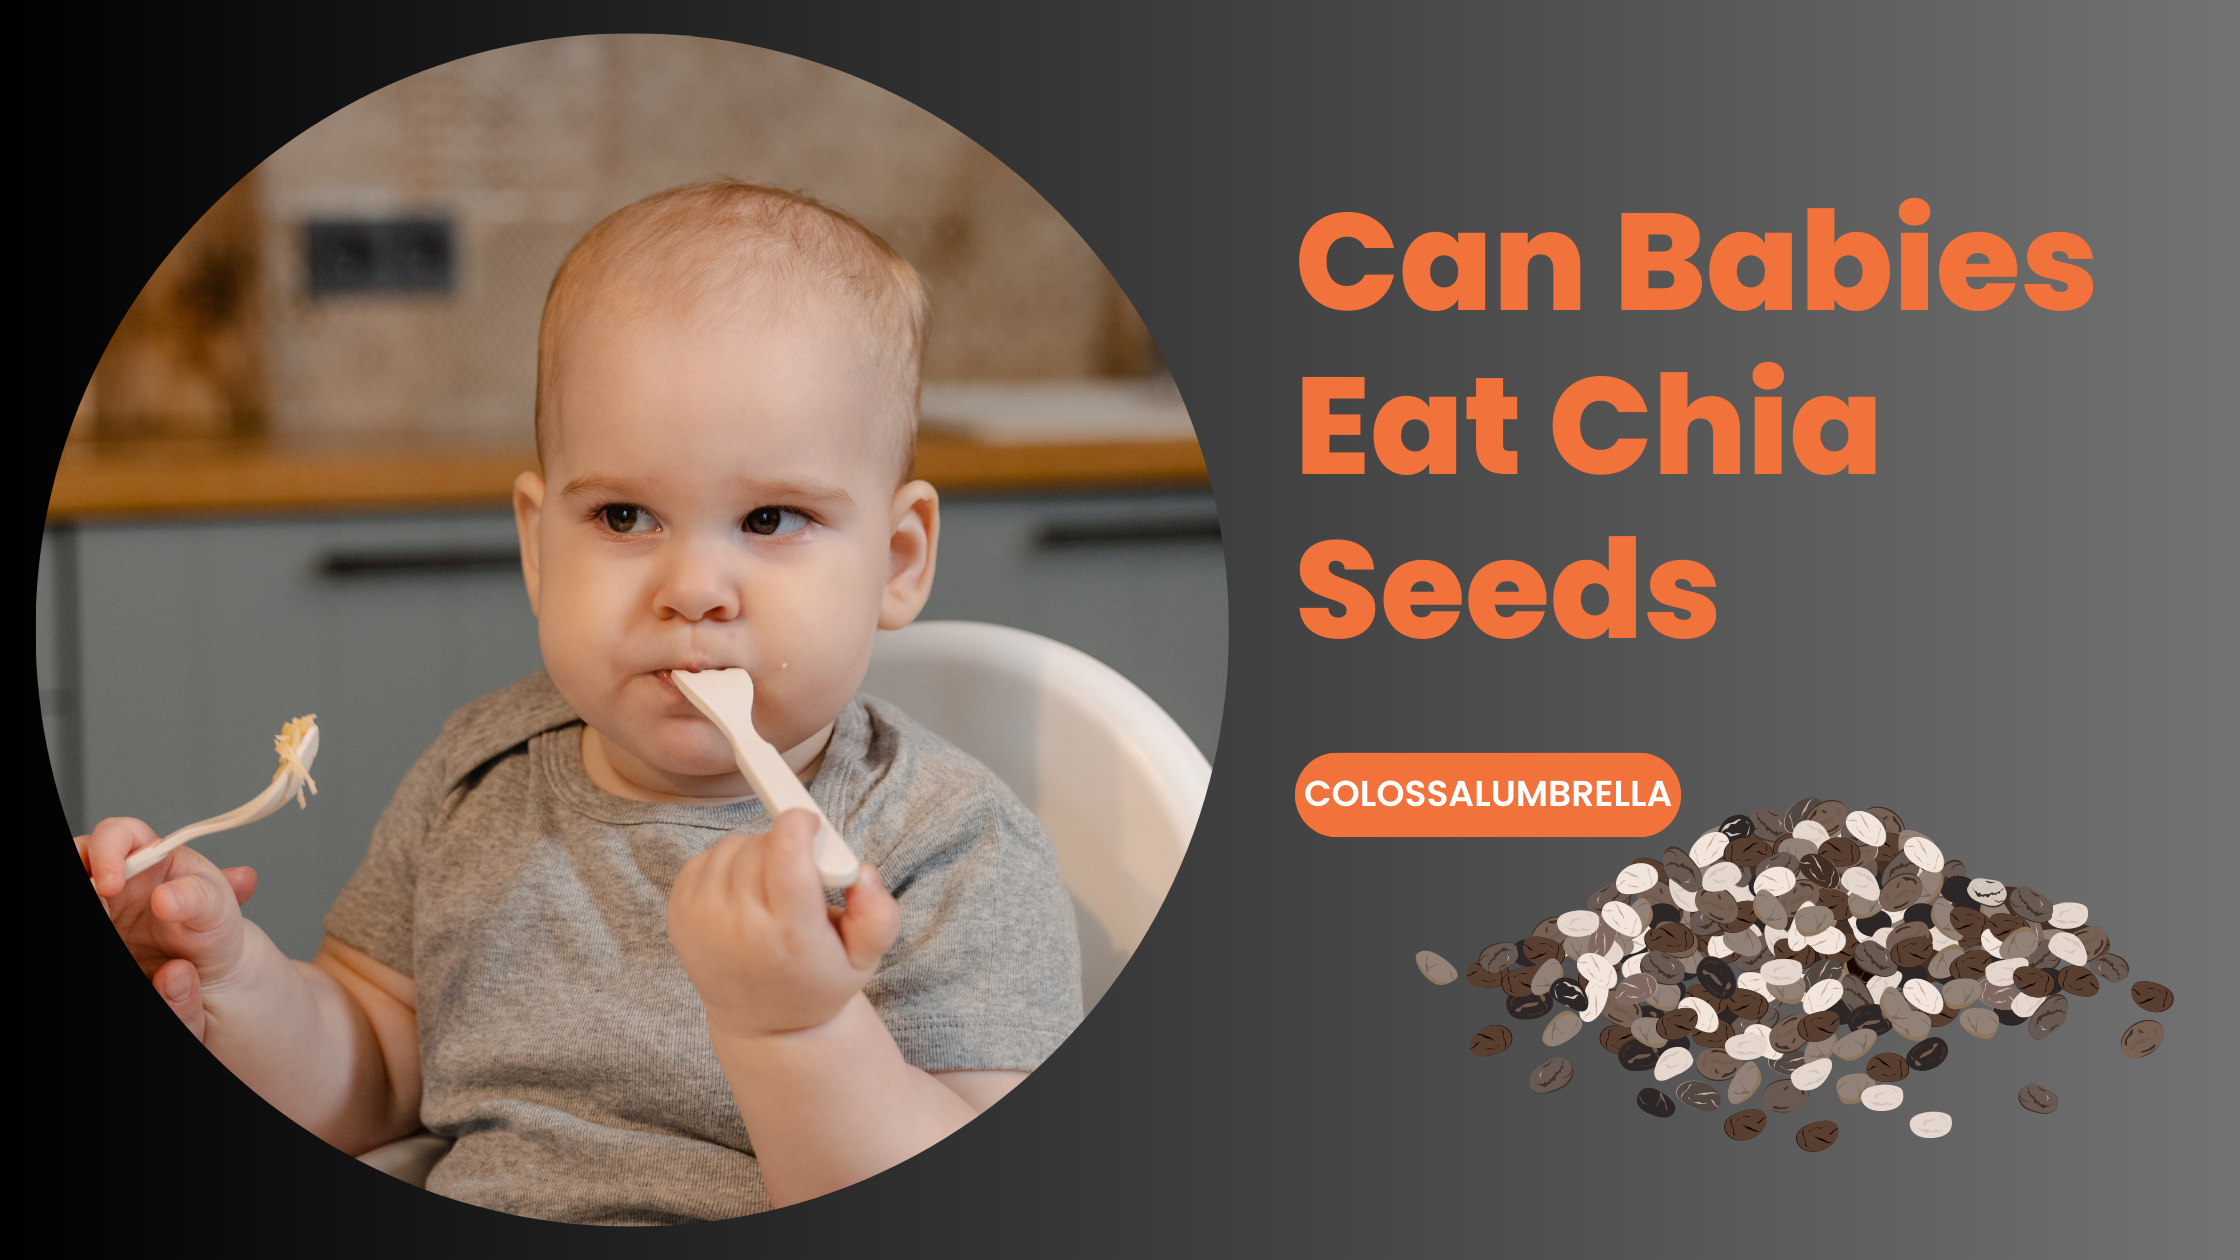 Can Babies Eat Chia Seeds – 8 Benefits based on research